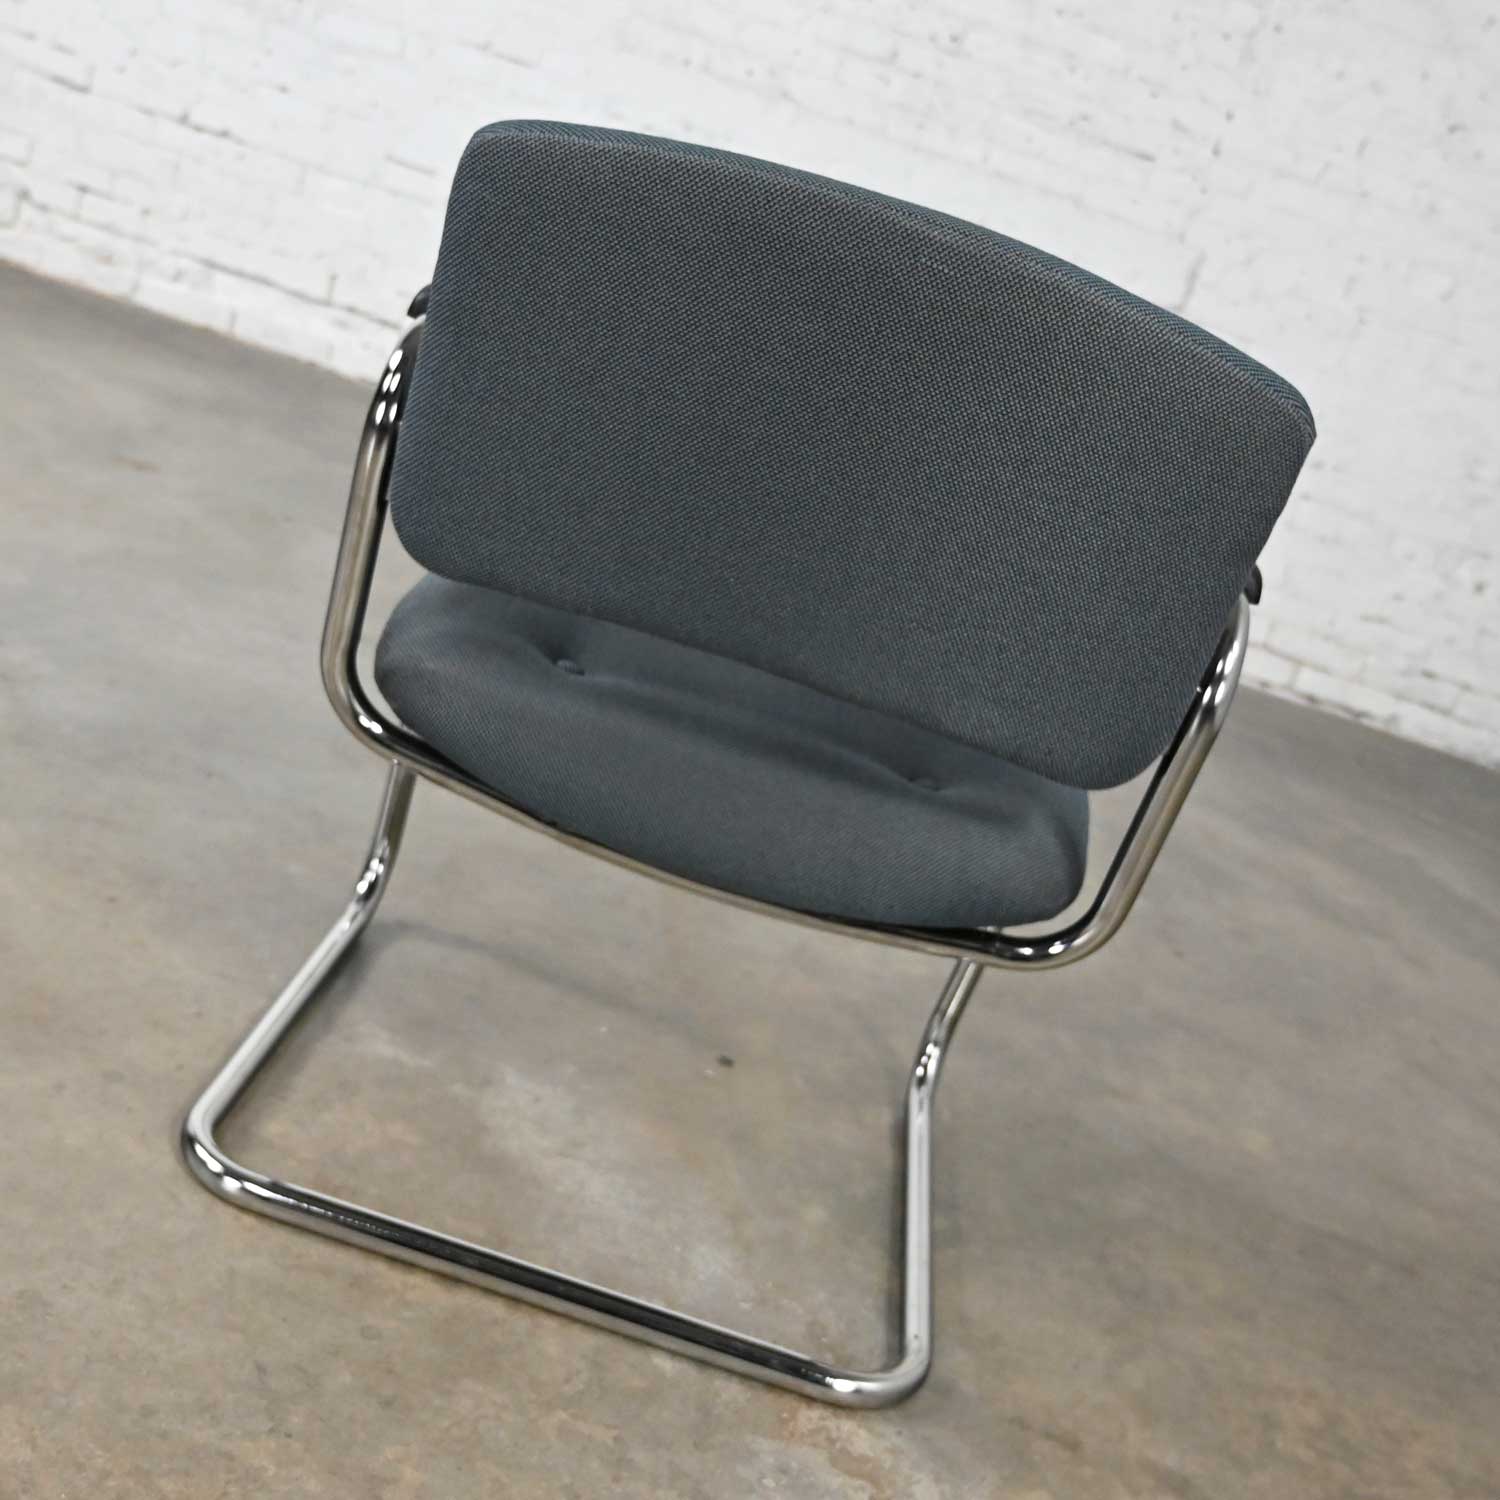 Vintage Gray Blue & Chrome Cantilever Chairs by United Chair Co Style of Steelcase Sold Separately